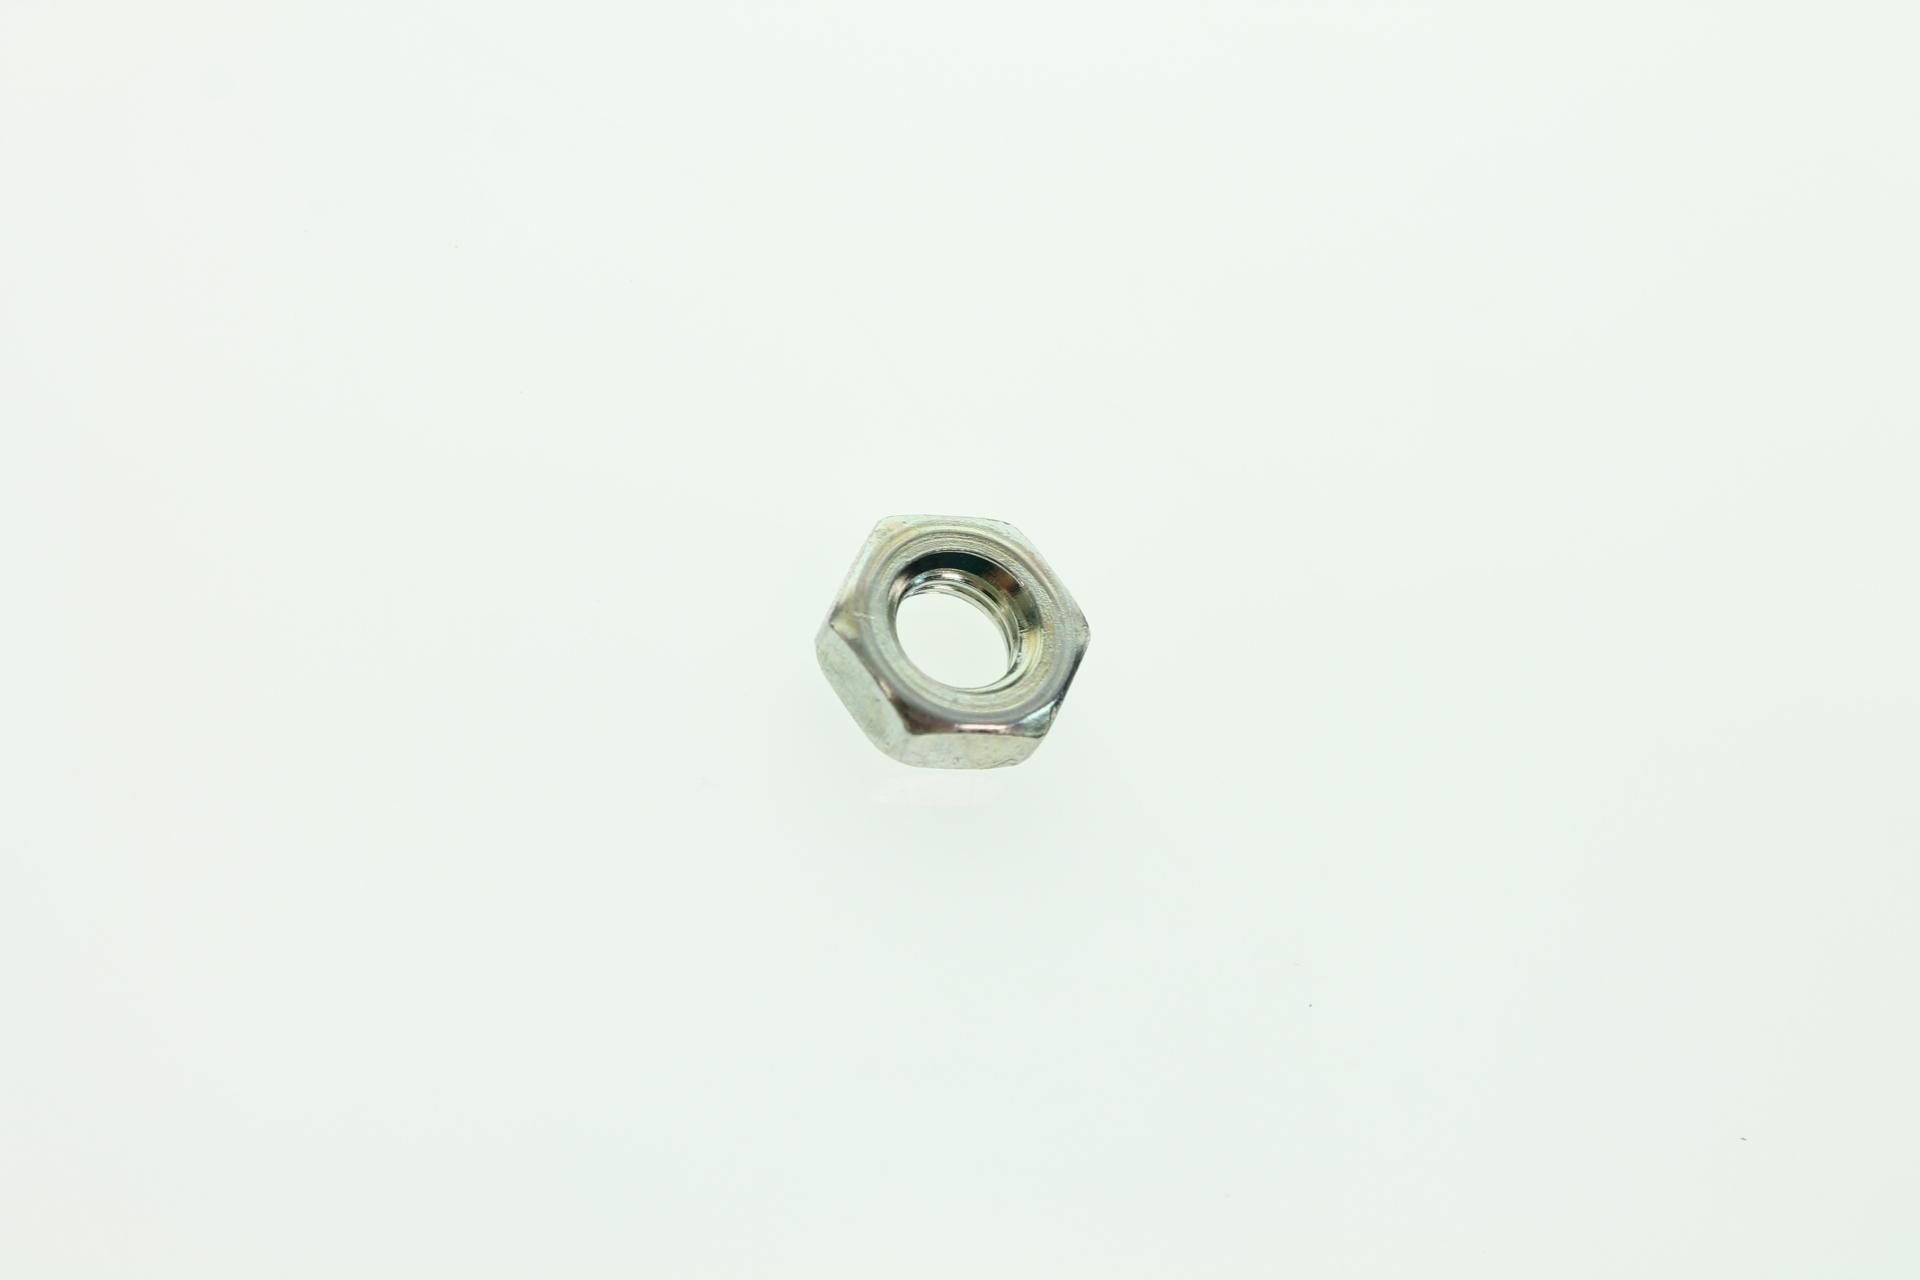 00000-00030 Superseded by 94002-06000-0S - NUT, HEX. (6MM)